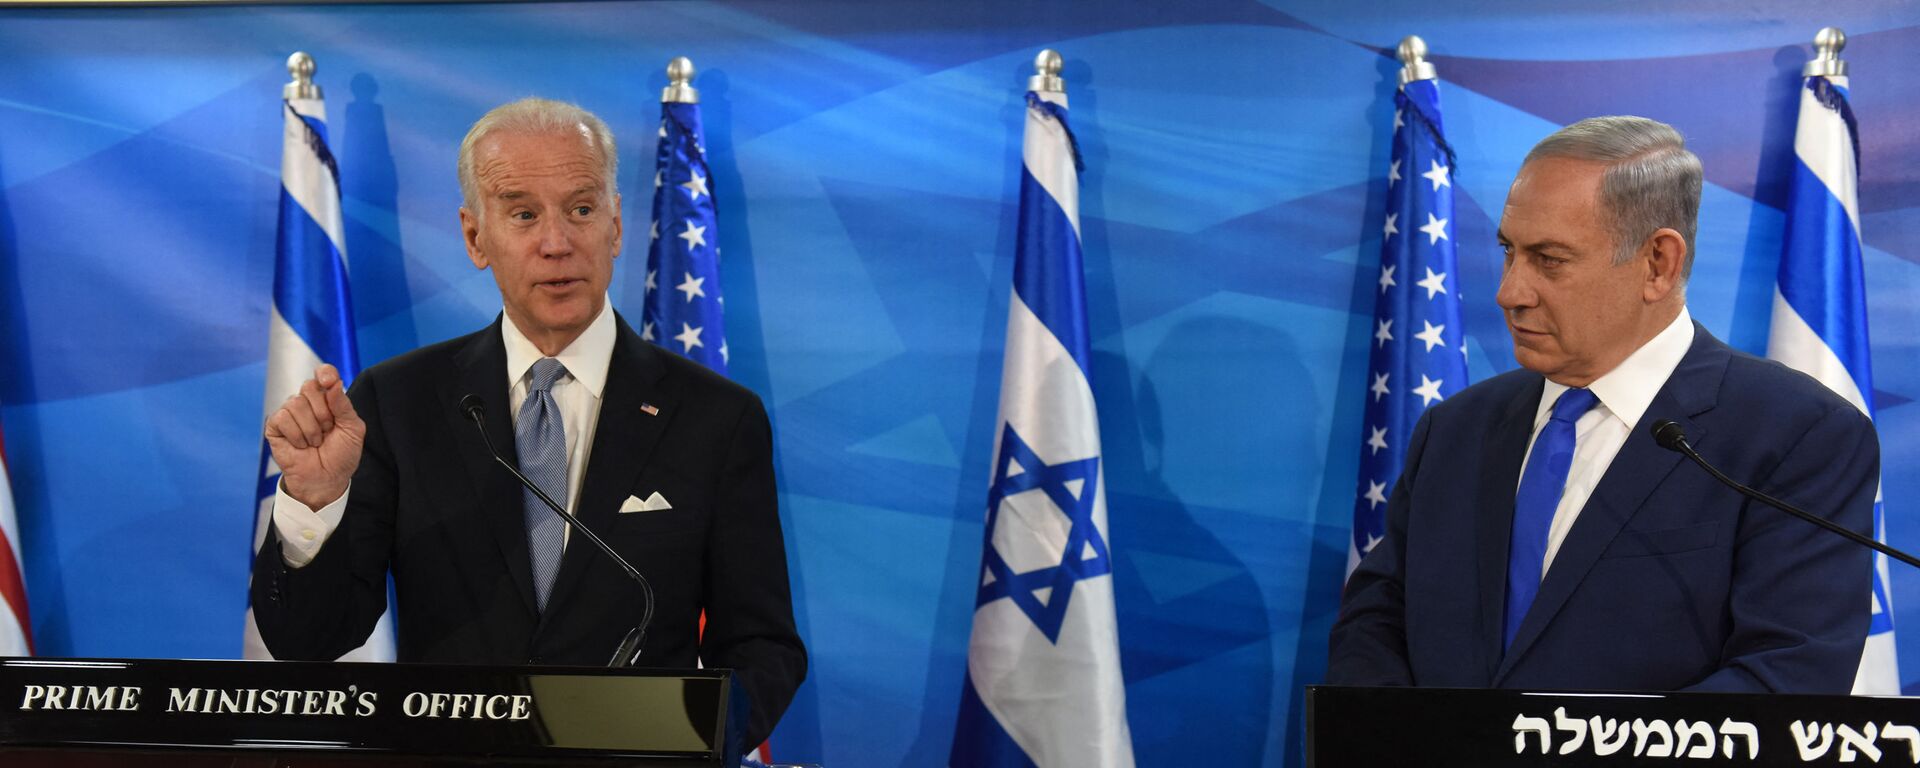 US Vice President Joe Biden (L) and Israeli Prime Minister Benjamin Netanyahu give joint statements to press in the prime minister's office in Jerusalem on March 9, 2016. - Biden implicitly criticised Palestinian leaders for not condemning attacks against Israelis, as an upsurge in violence marred his visit.  - Sputnik International, 1920